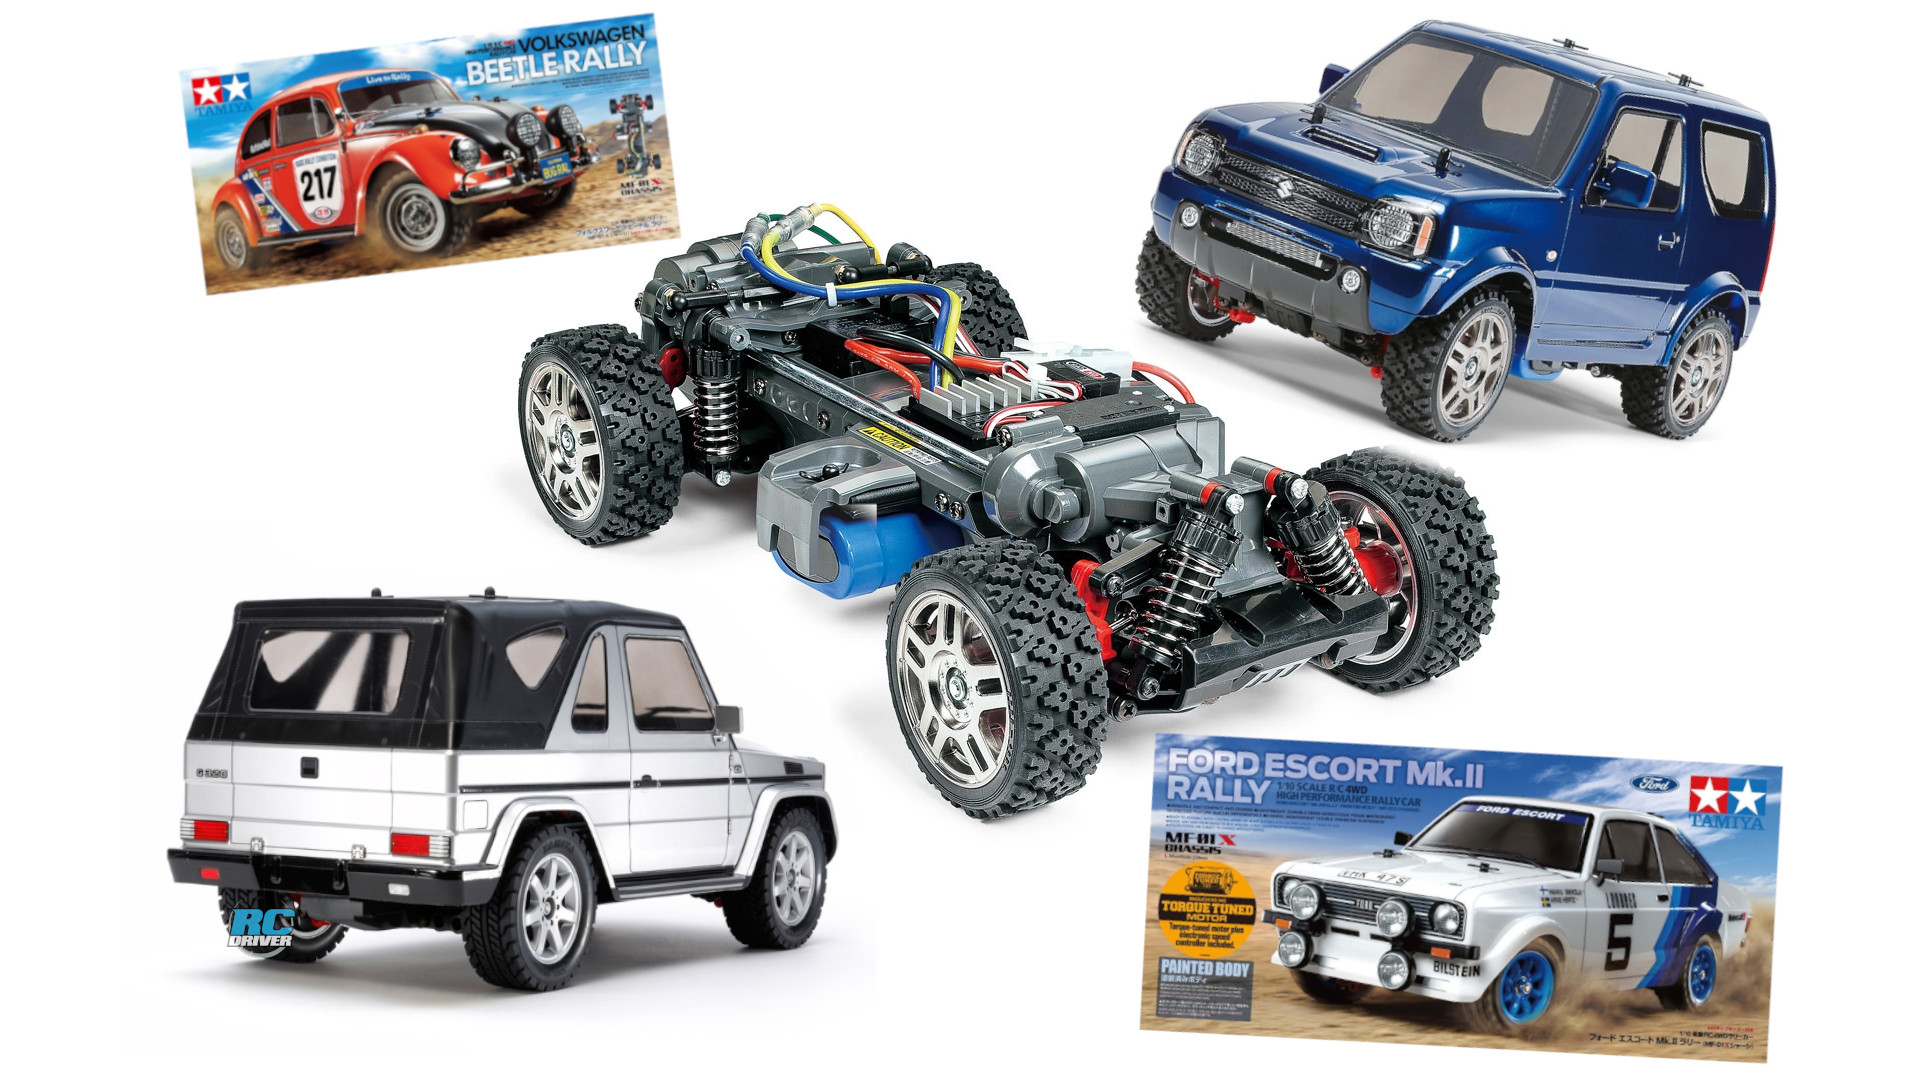 Tamiya MF-01X Vehicles Have M-chassis Pedigree With Off-Road